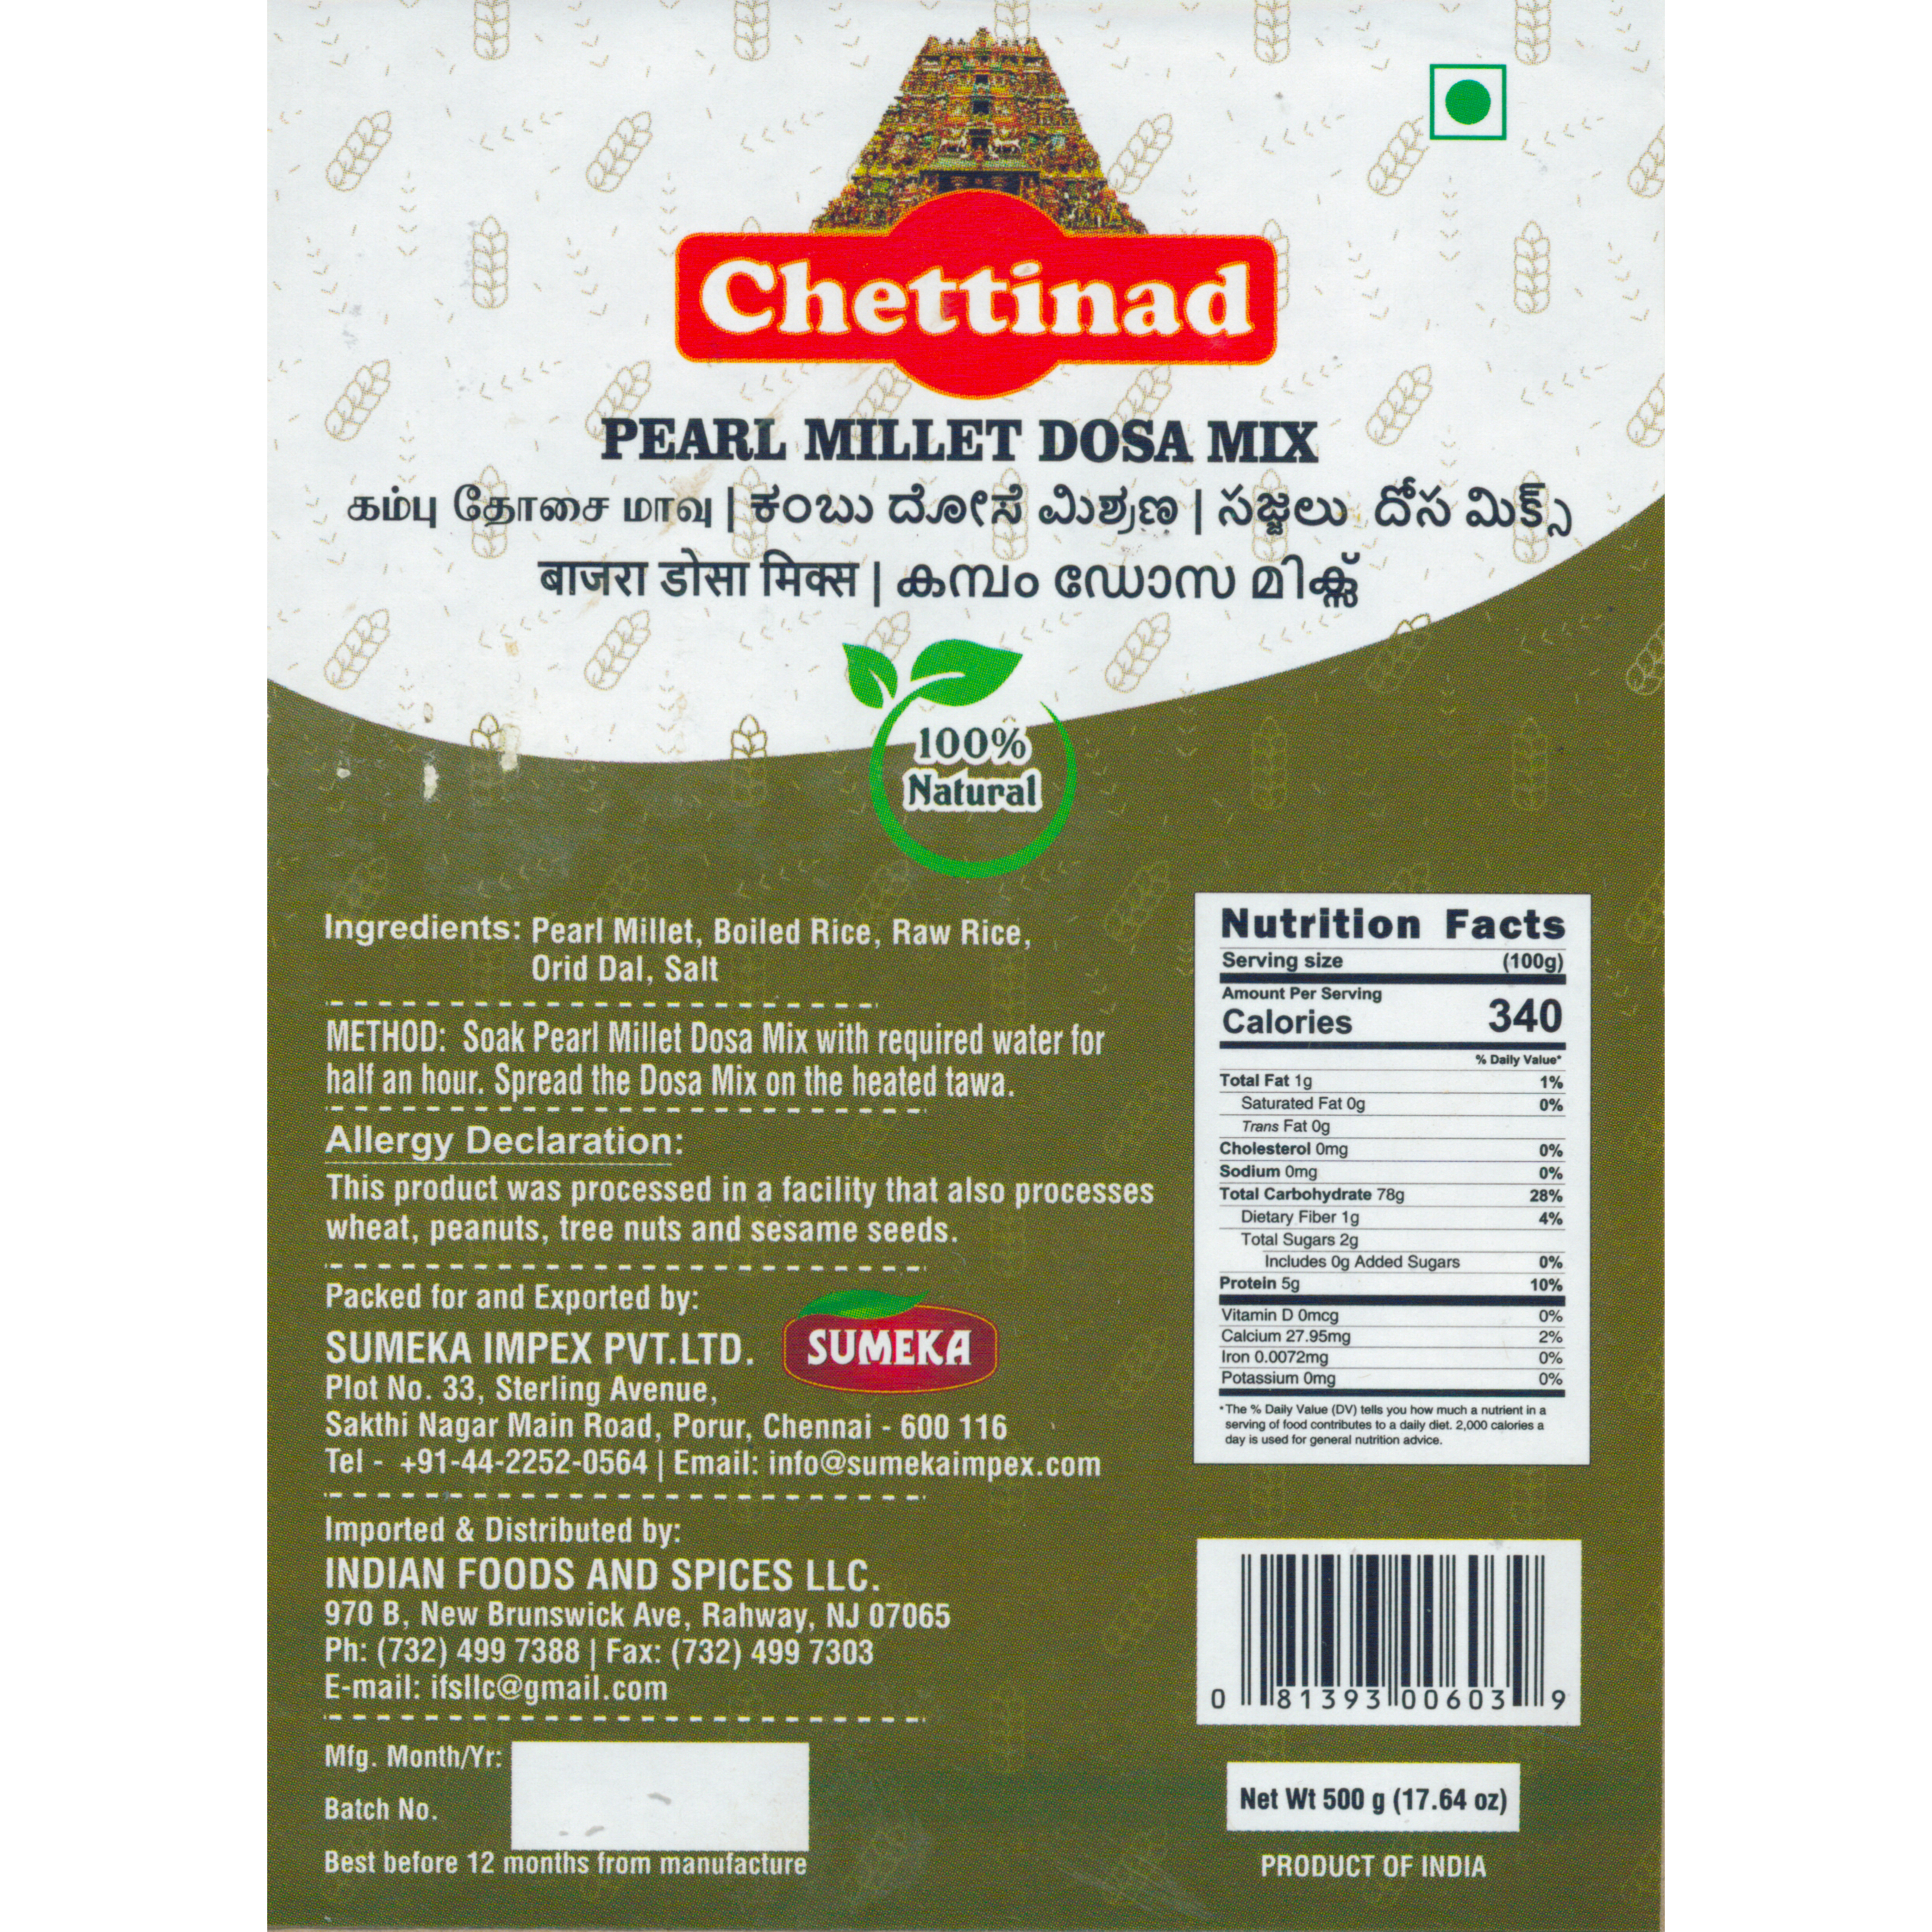 Case of 20 - Chettinad Pearl Millet Dosa Mix - 500 Gm (1.1 Lb)